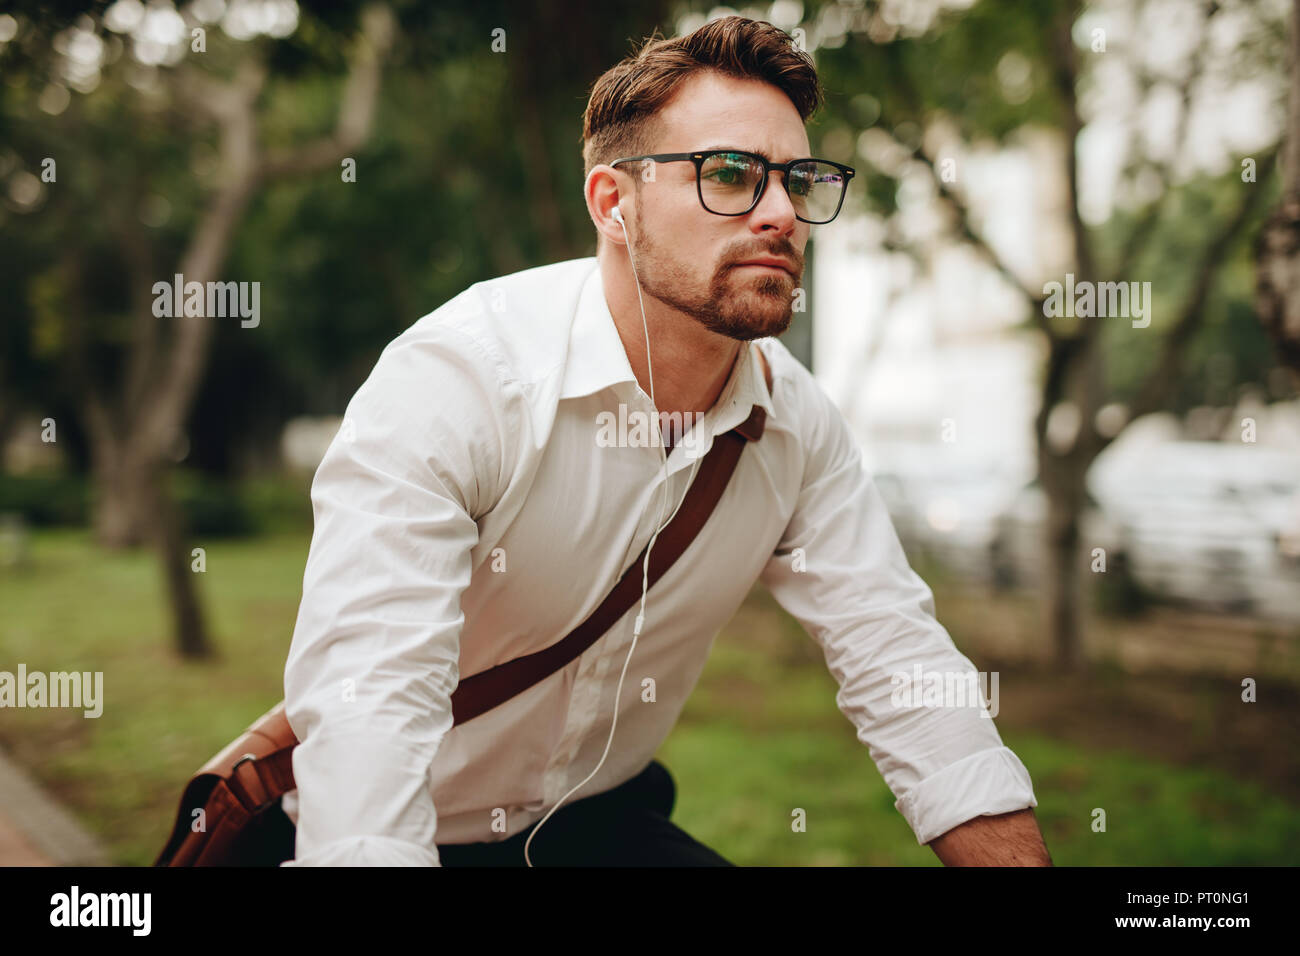 Businessman commuting to office on a bike listening to music. Man riding a two wheeler listening to music on earphones. Stock Photo